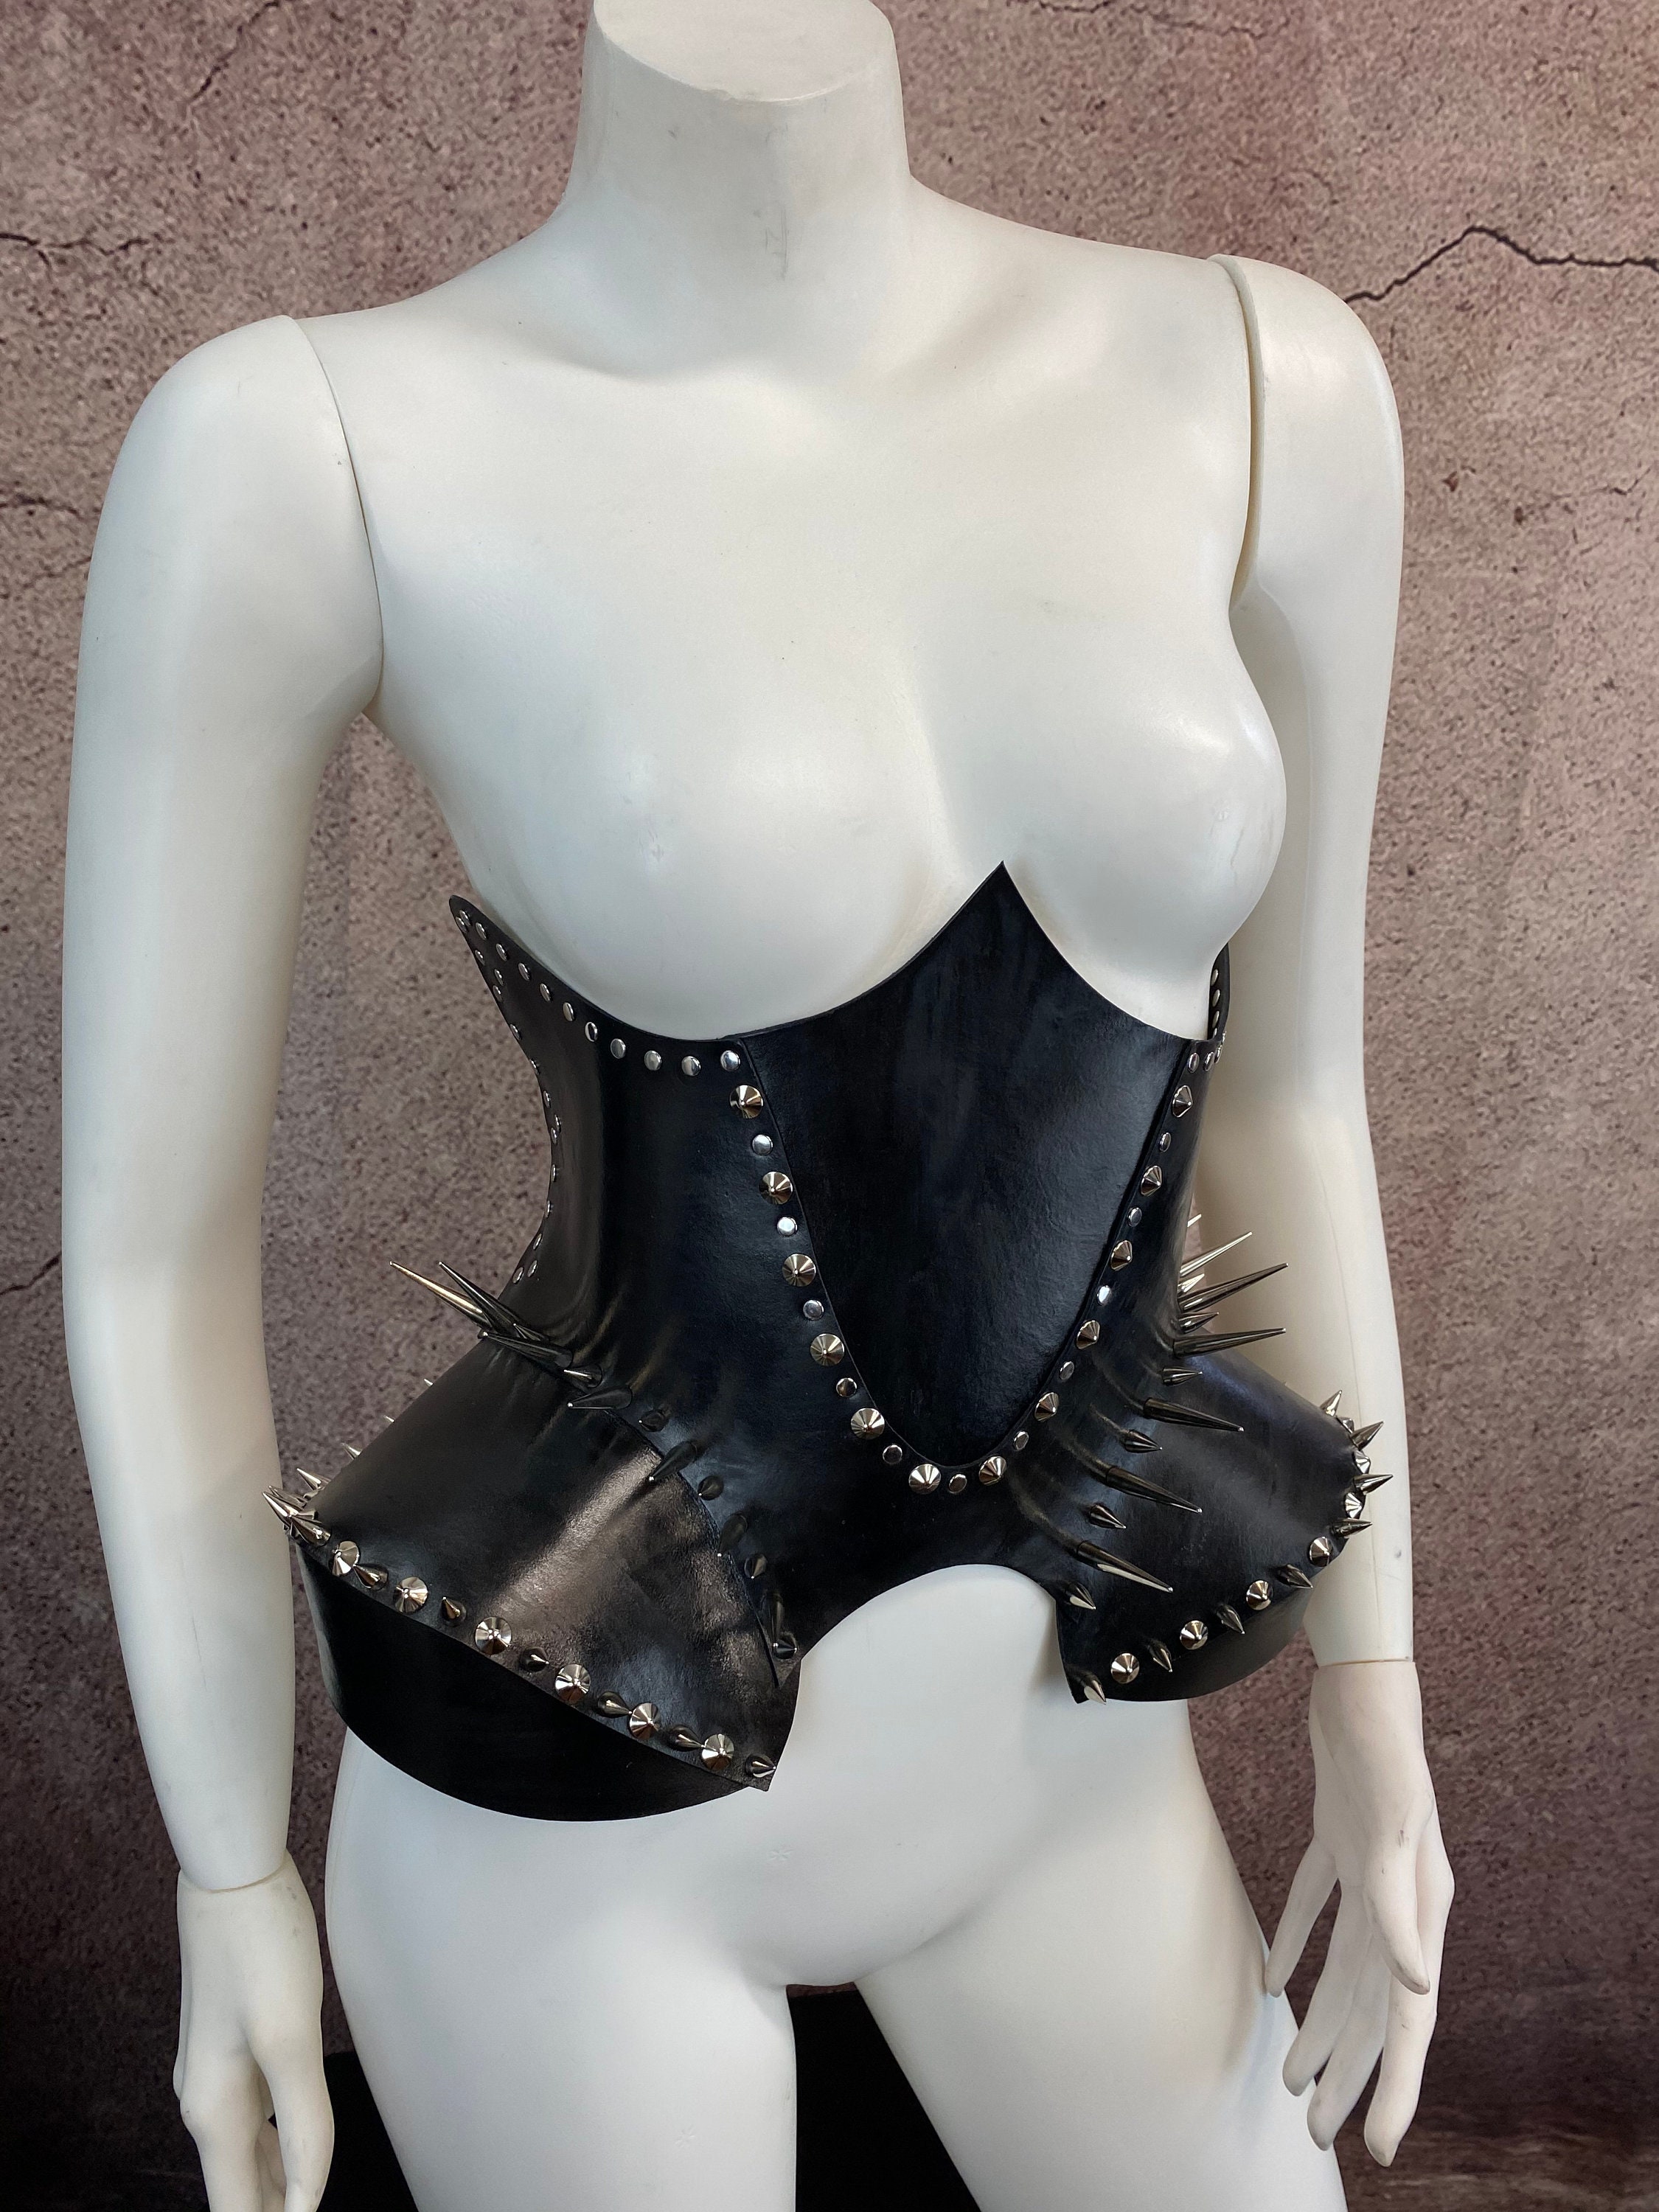 The Stigmata Cupless Corset, Leather Fashion Corset With Spikes, Custom  Festival Harness, Handmade Leather Waist Cincher, Leather Lingerie 